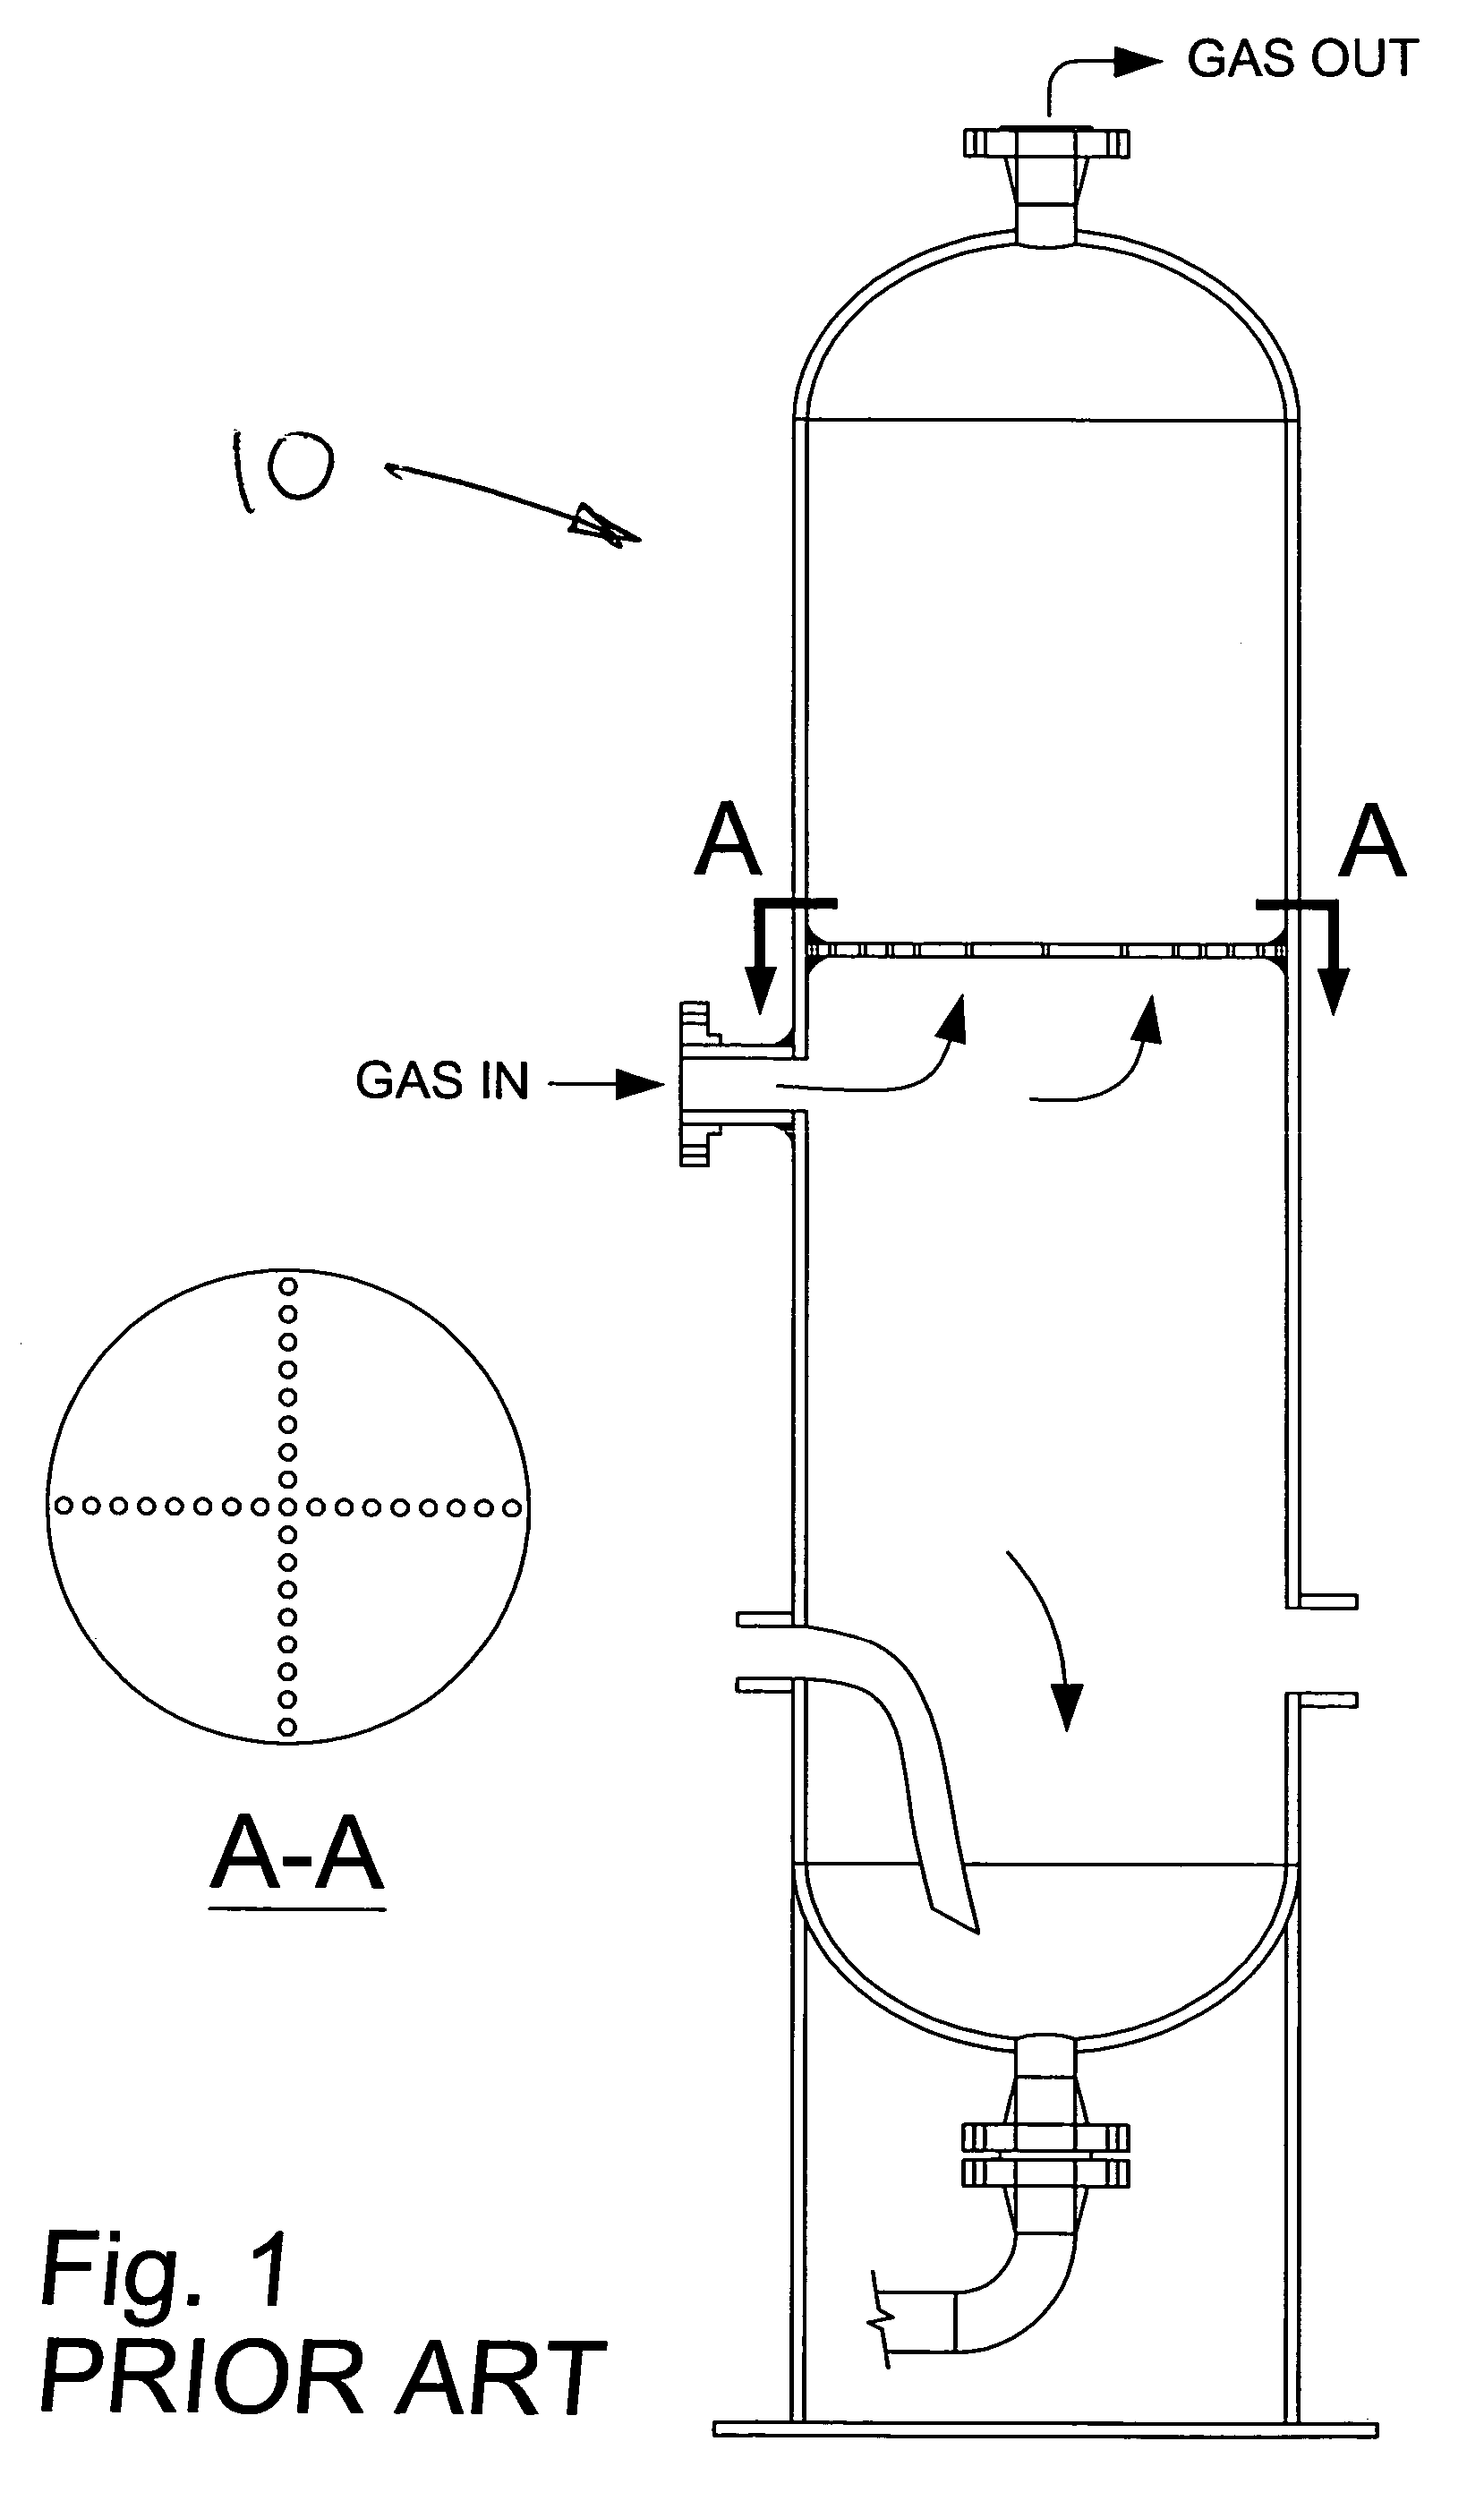 Apparatus and method for the removal of moisture and mists from gas flows